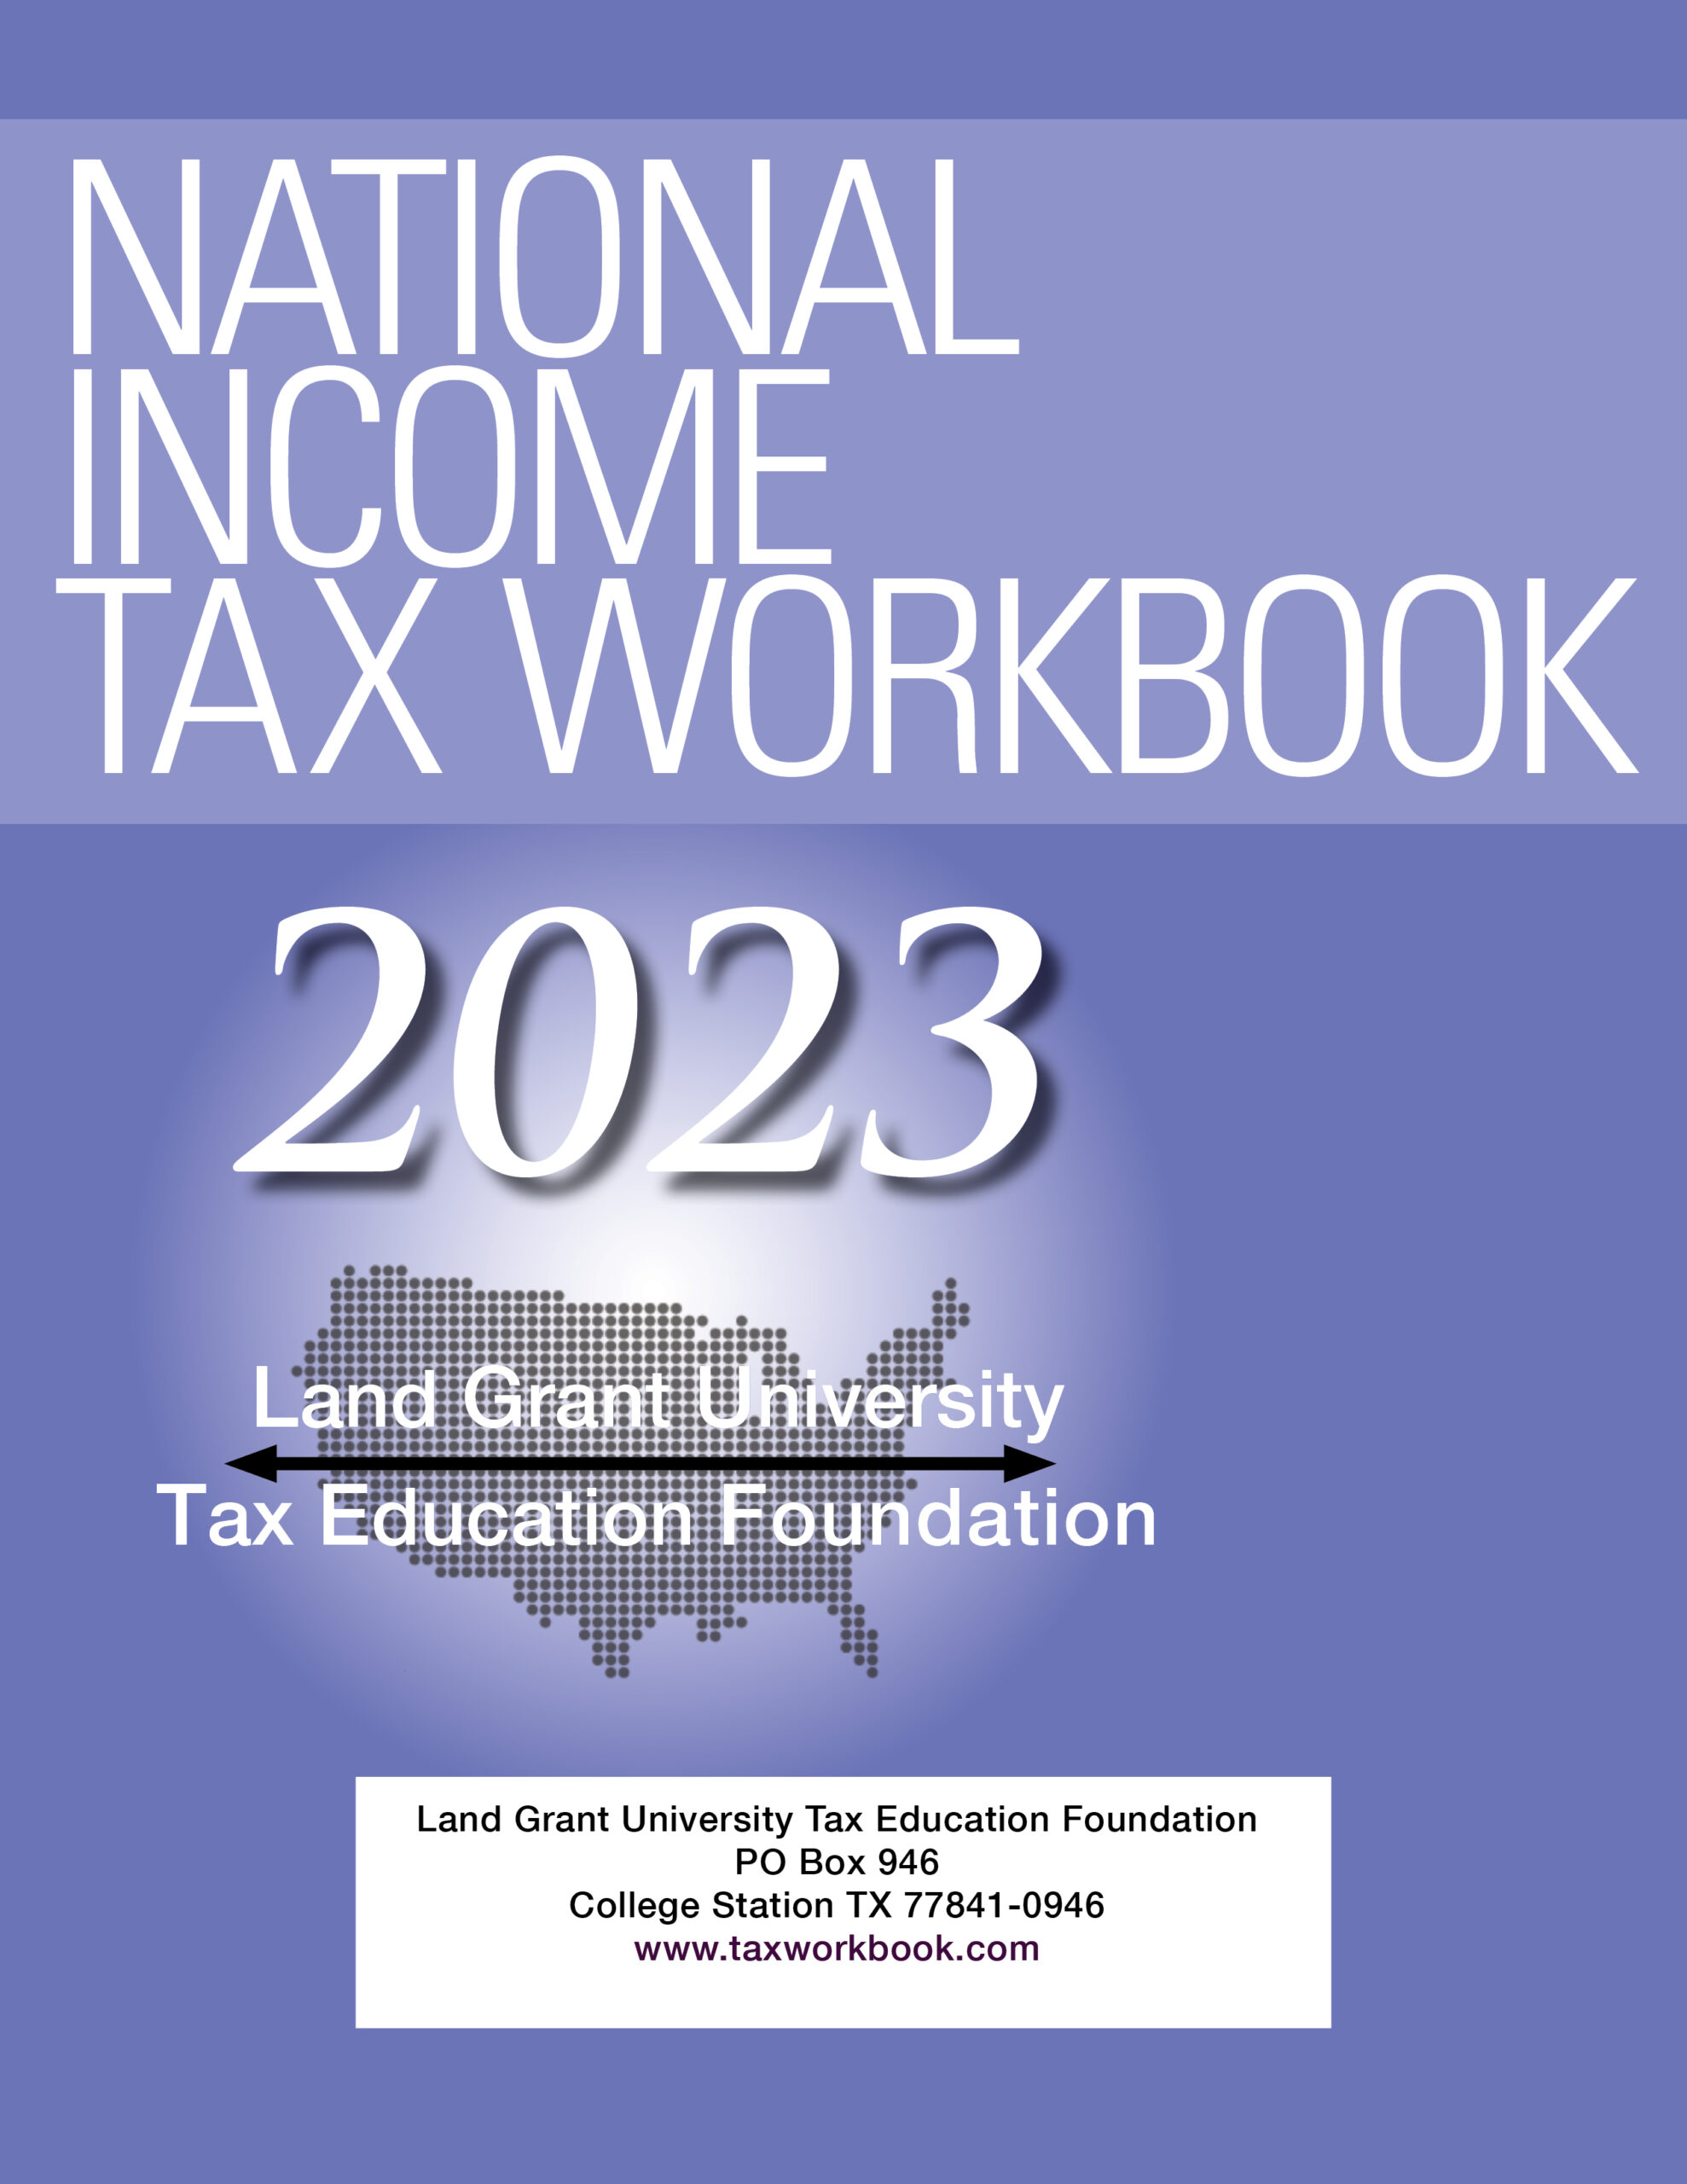 Front Cover of the 2021 National Income Tax Workbook